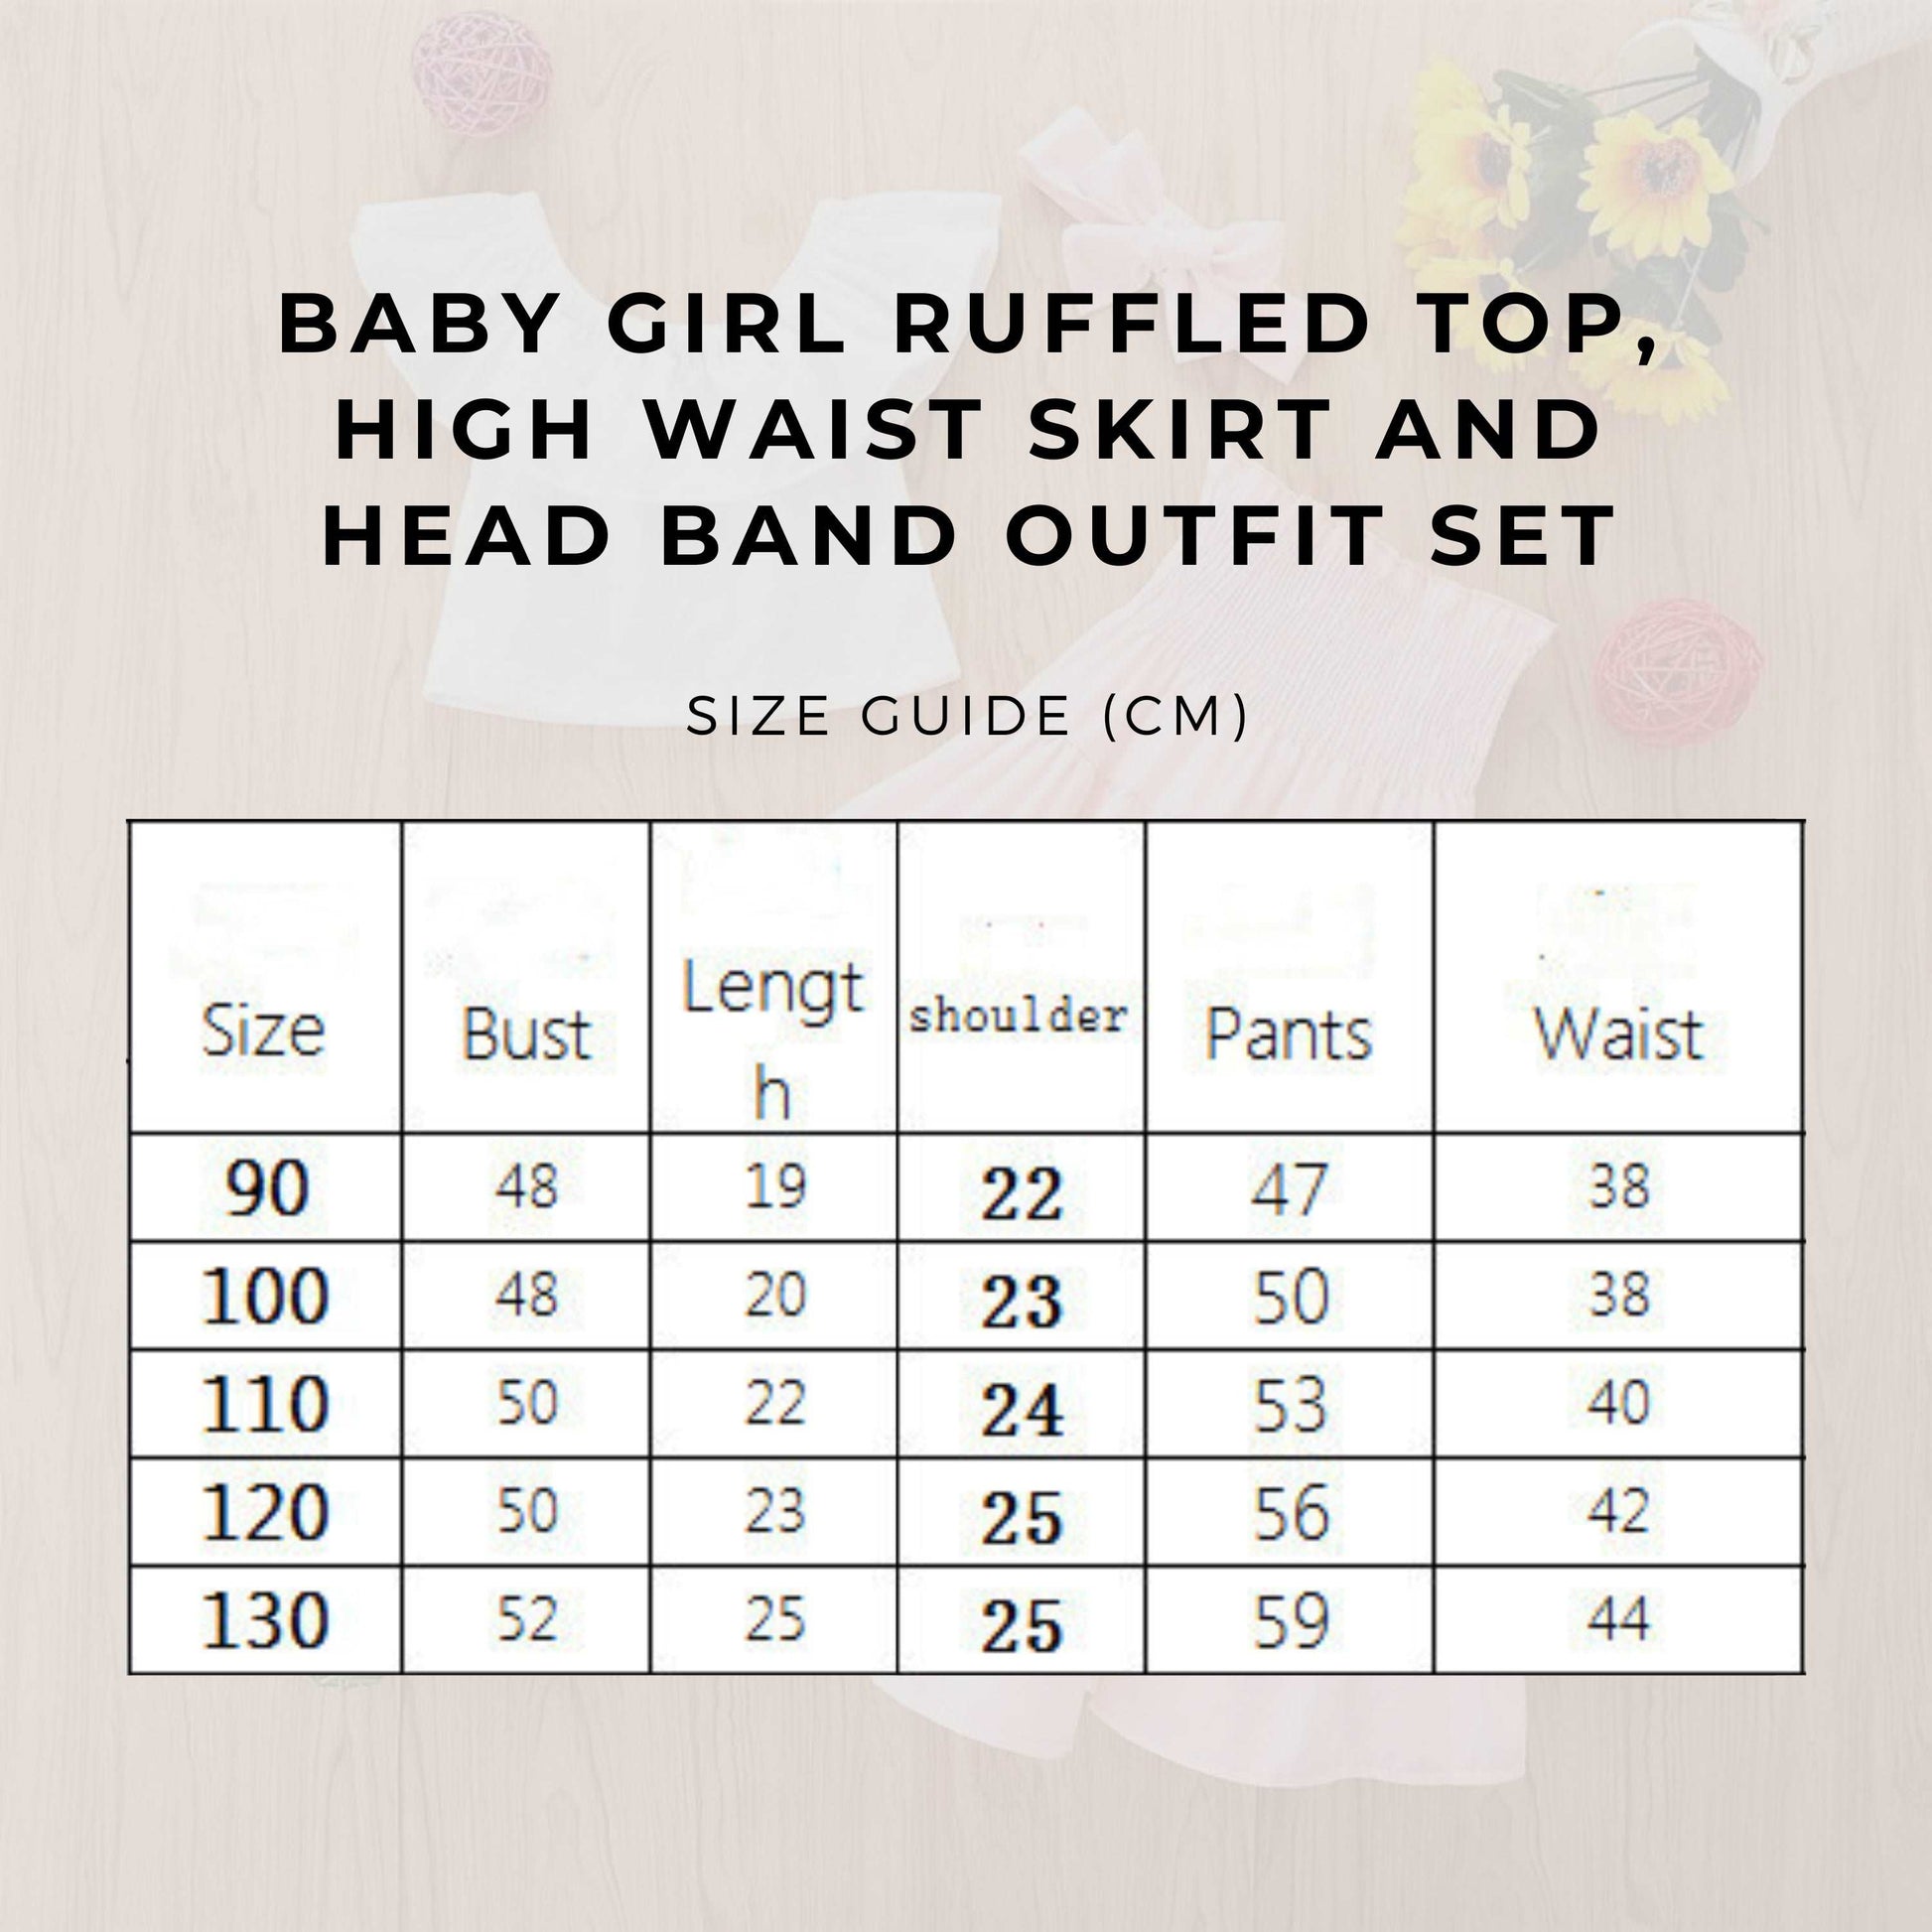 Baby Girl Ruffled Top, High Waist Skirt and Head Band Outfit Set size